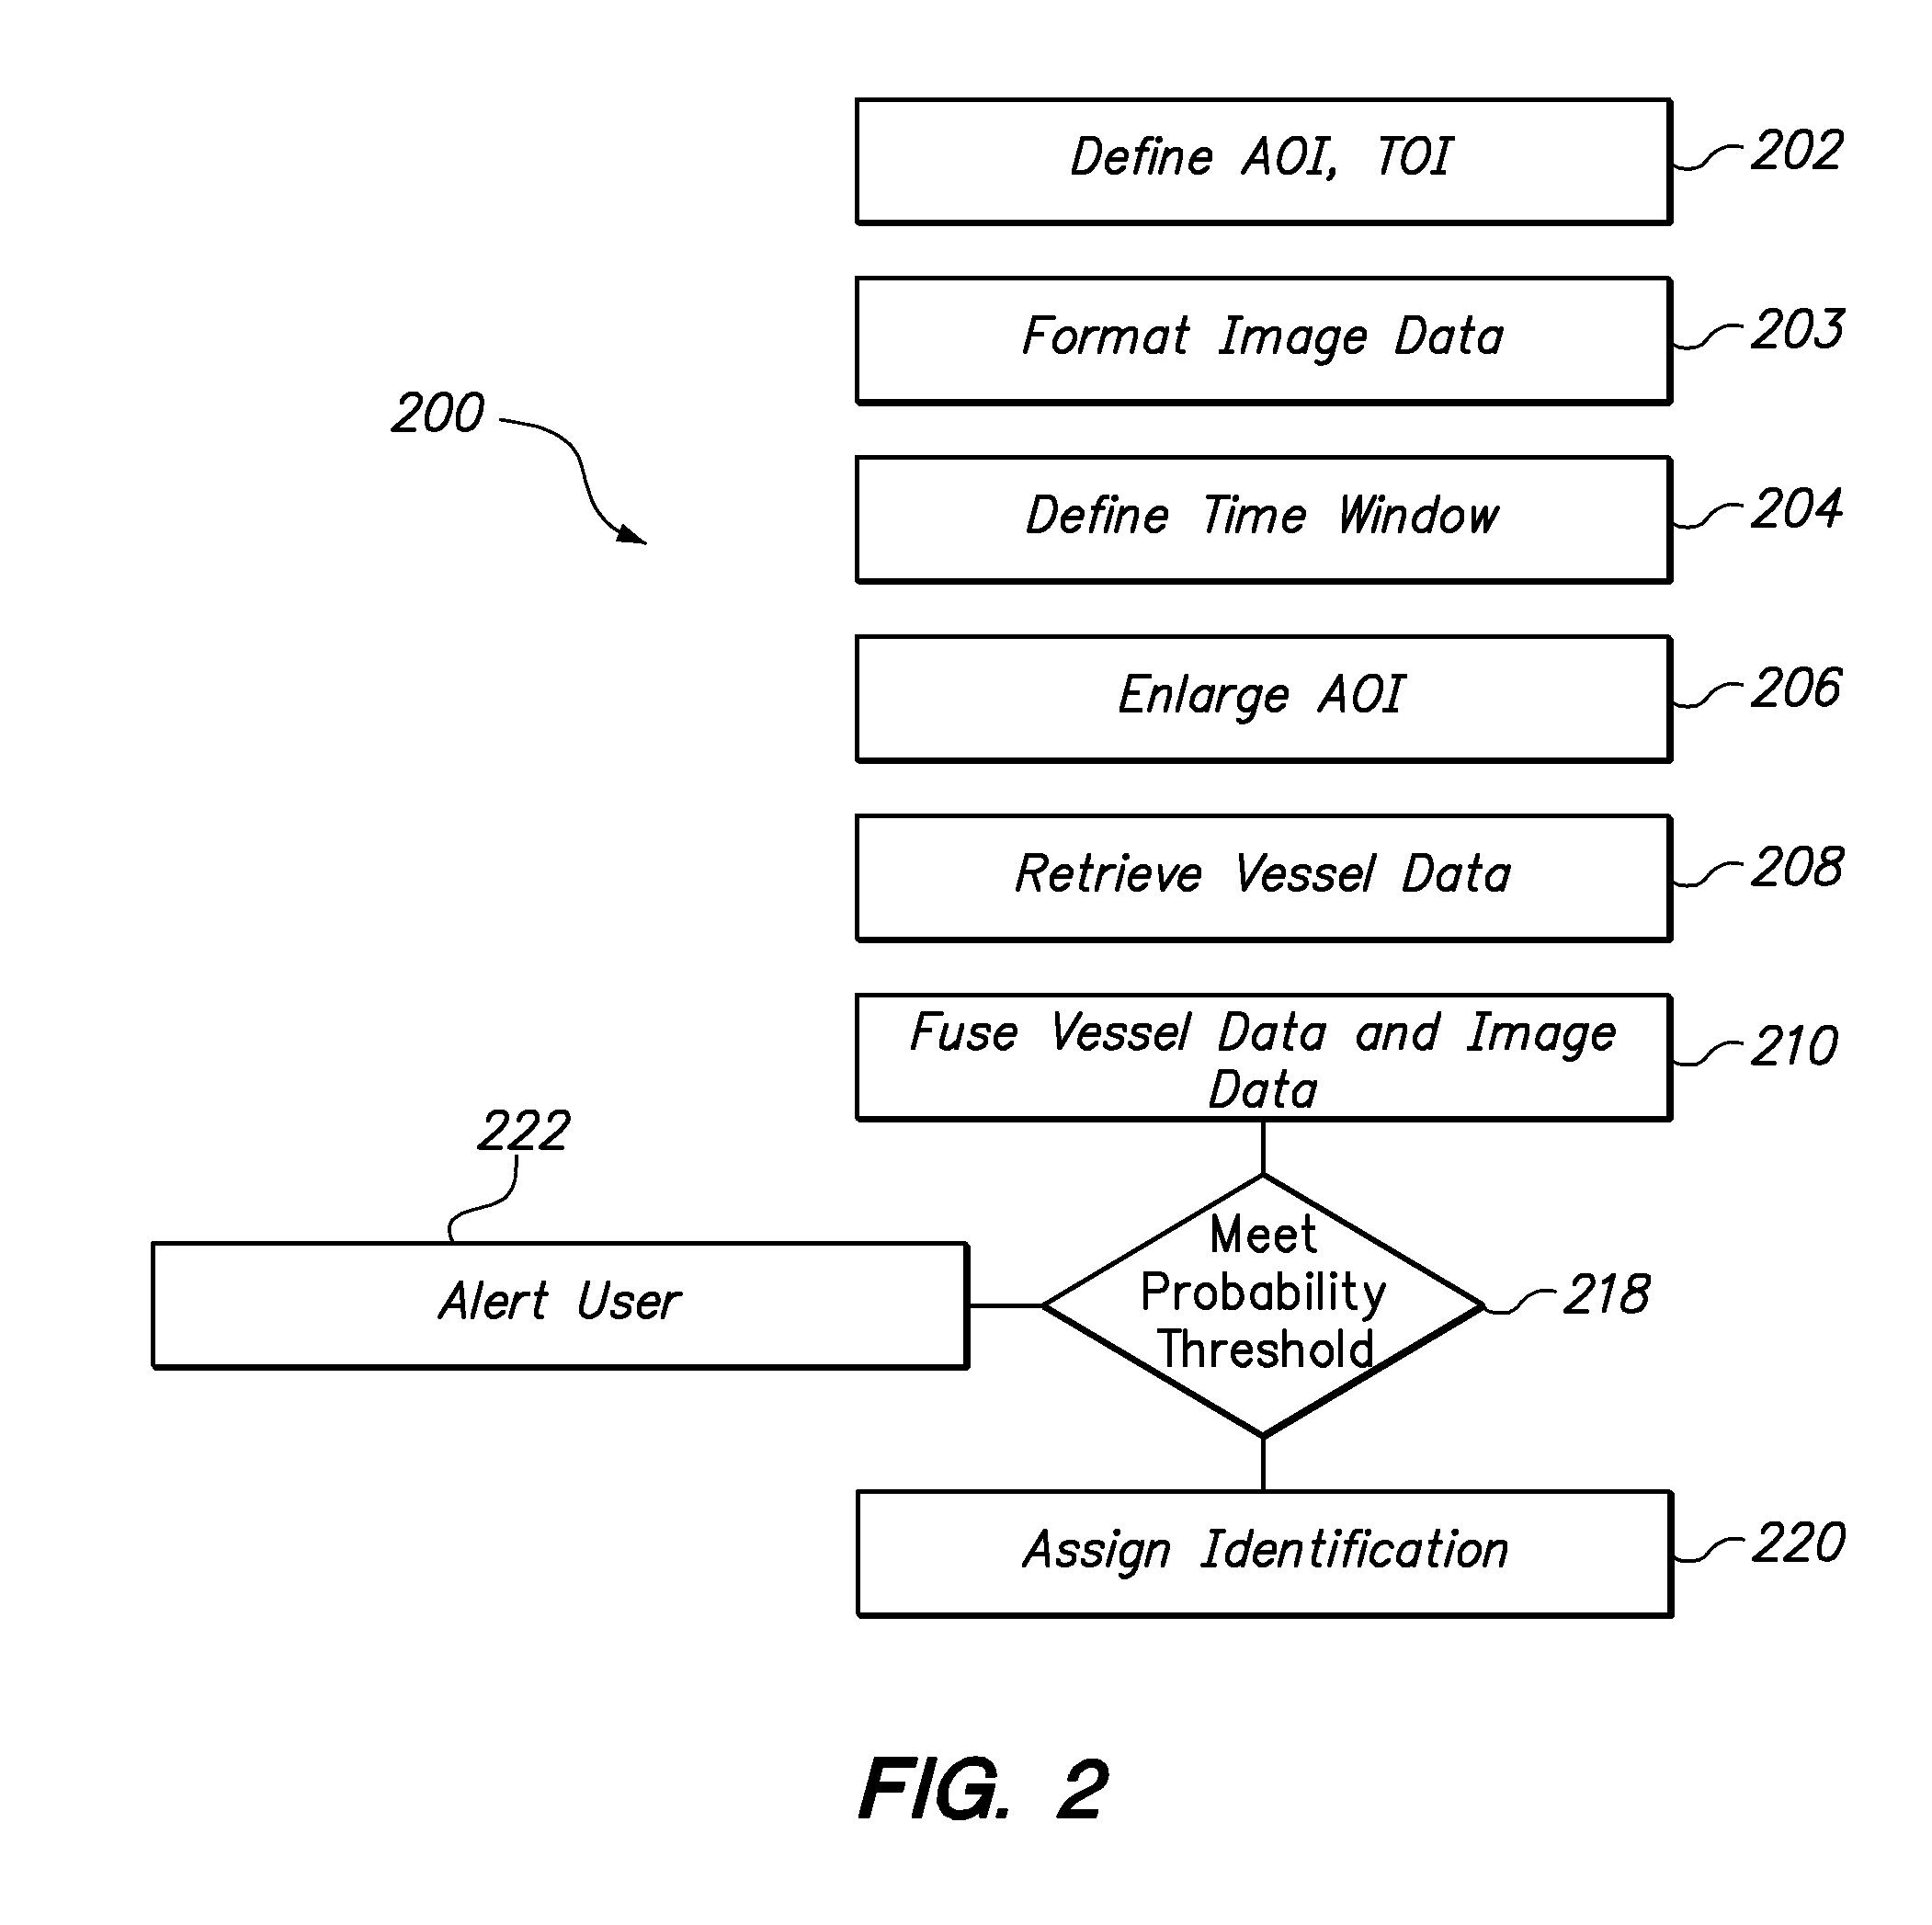 Method for fusing overhead imagery with automatic vessel reporting systems